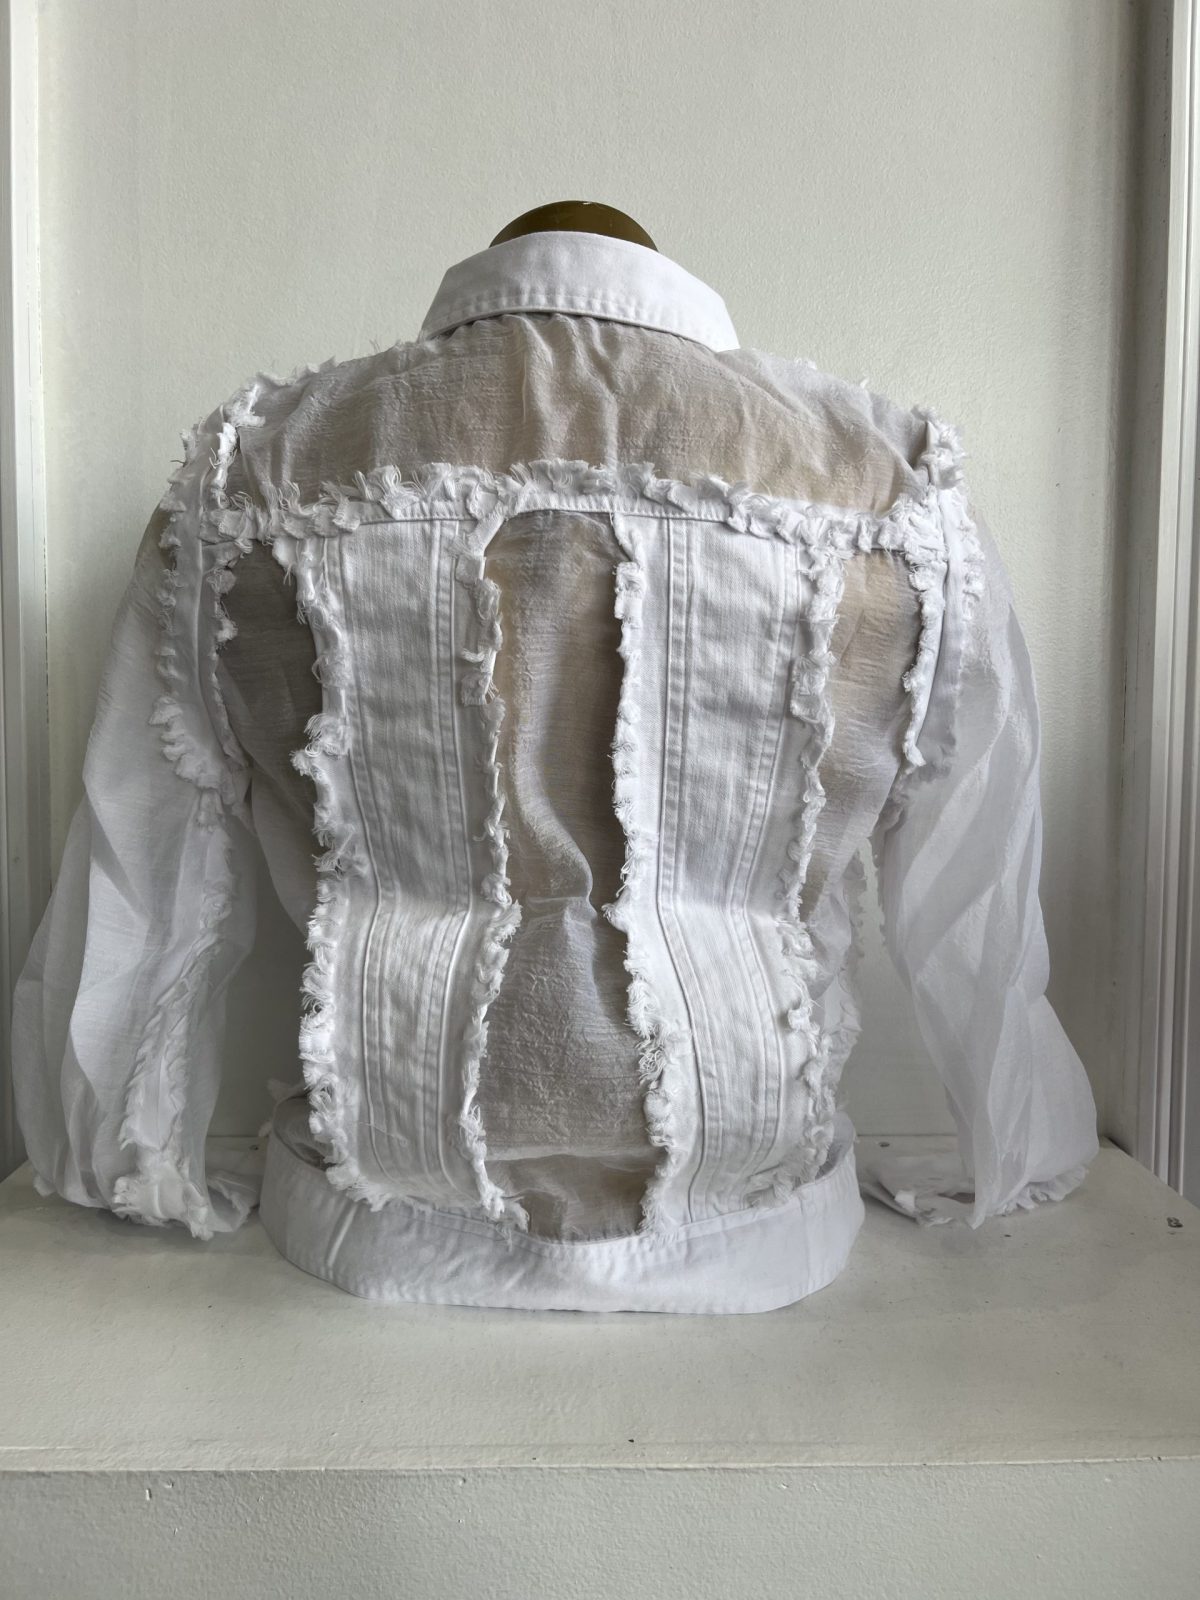 AZI Z12330 Sheera White Long Sleeve Sheer and Ruffle Accents Jacket | Ooh Ooh Shoes women's clothing and shoe boutique located in Naples and Mashpee